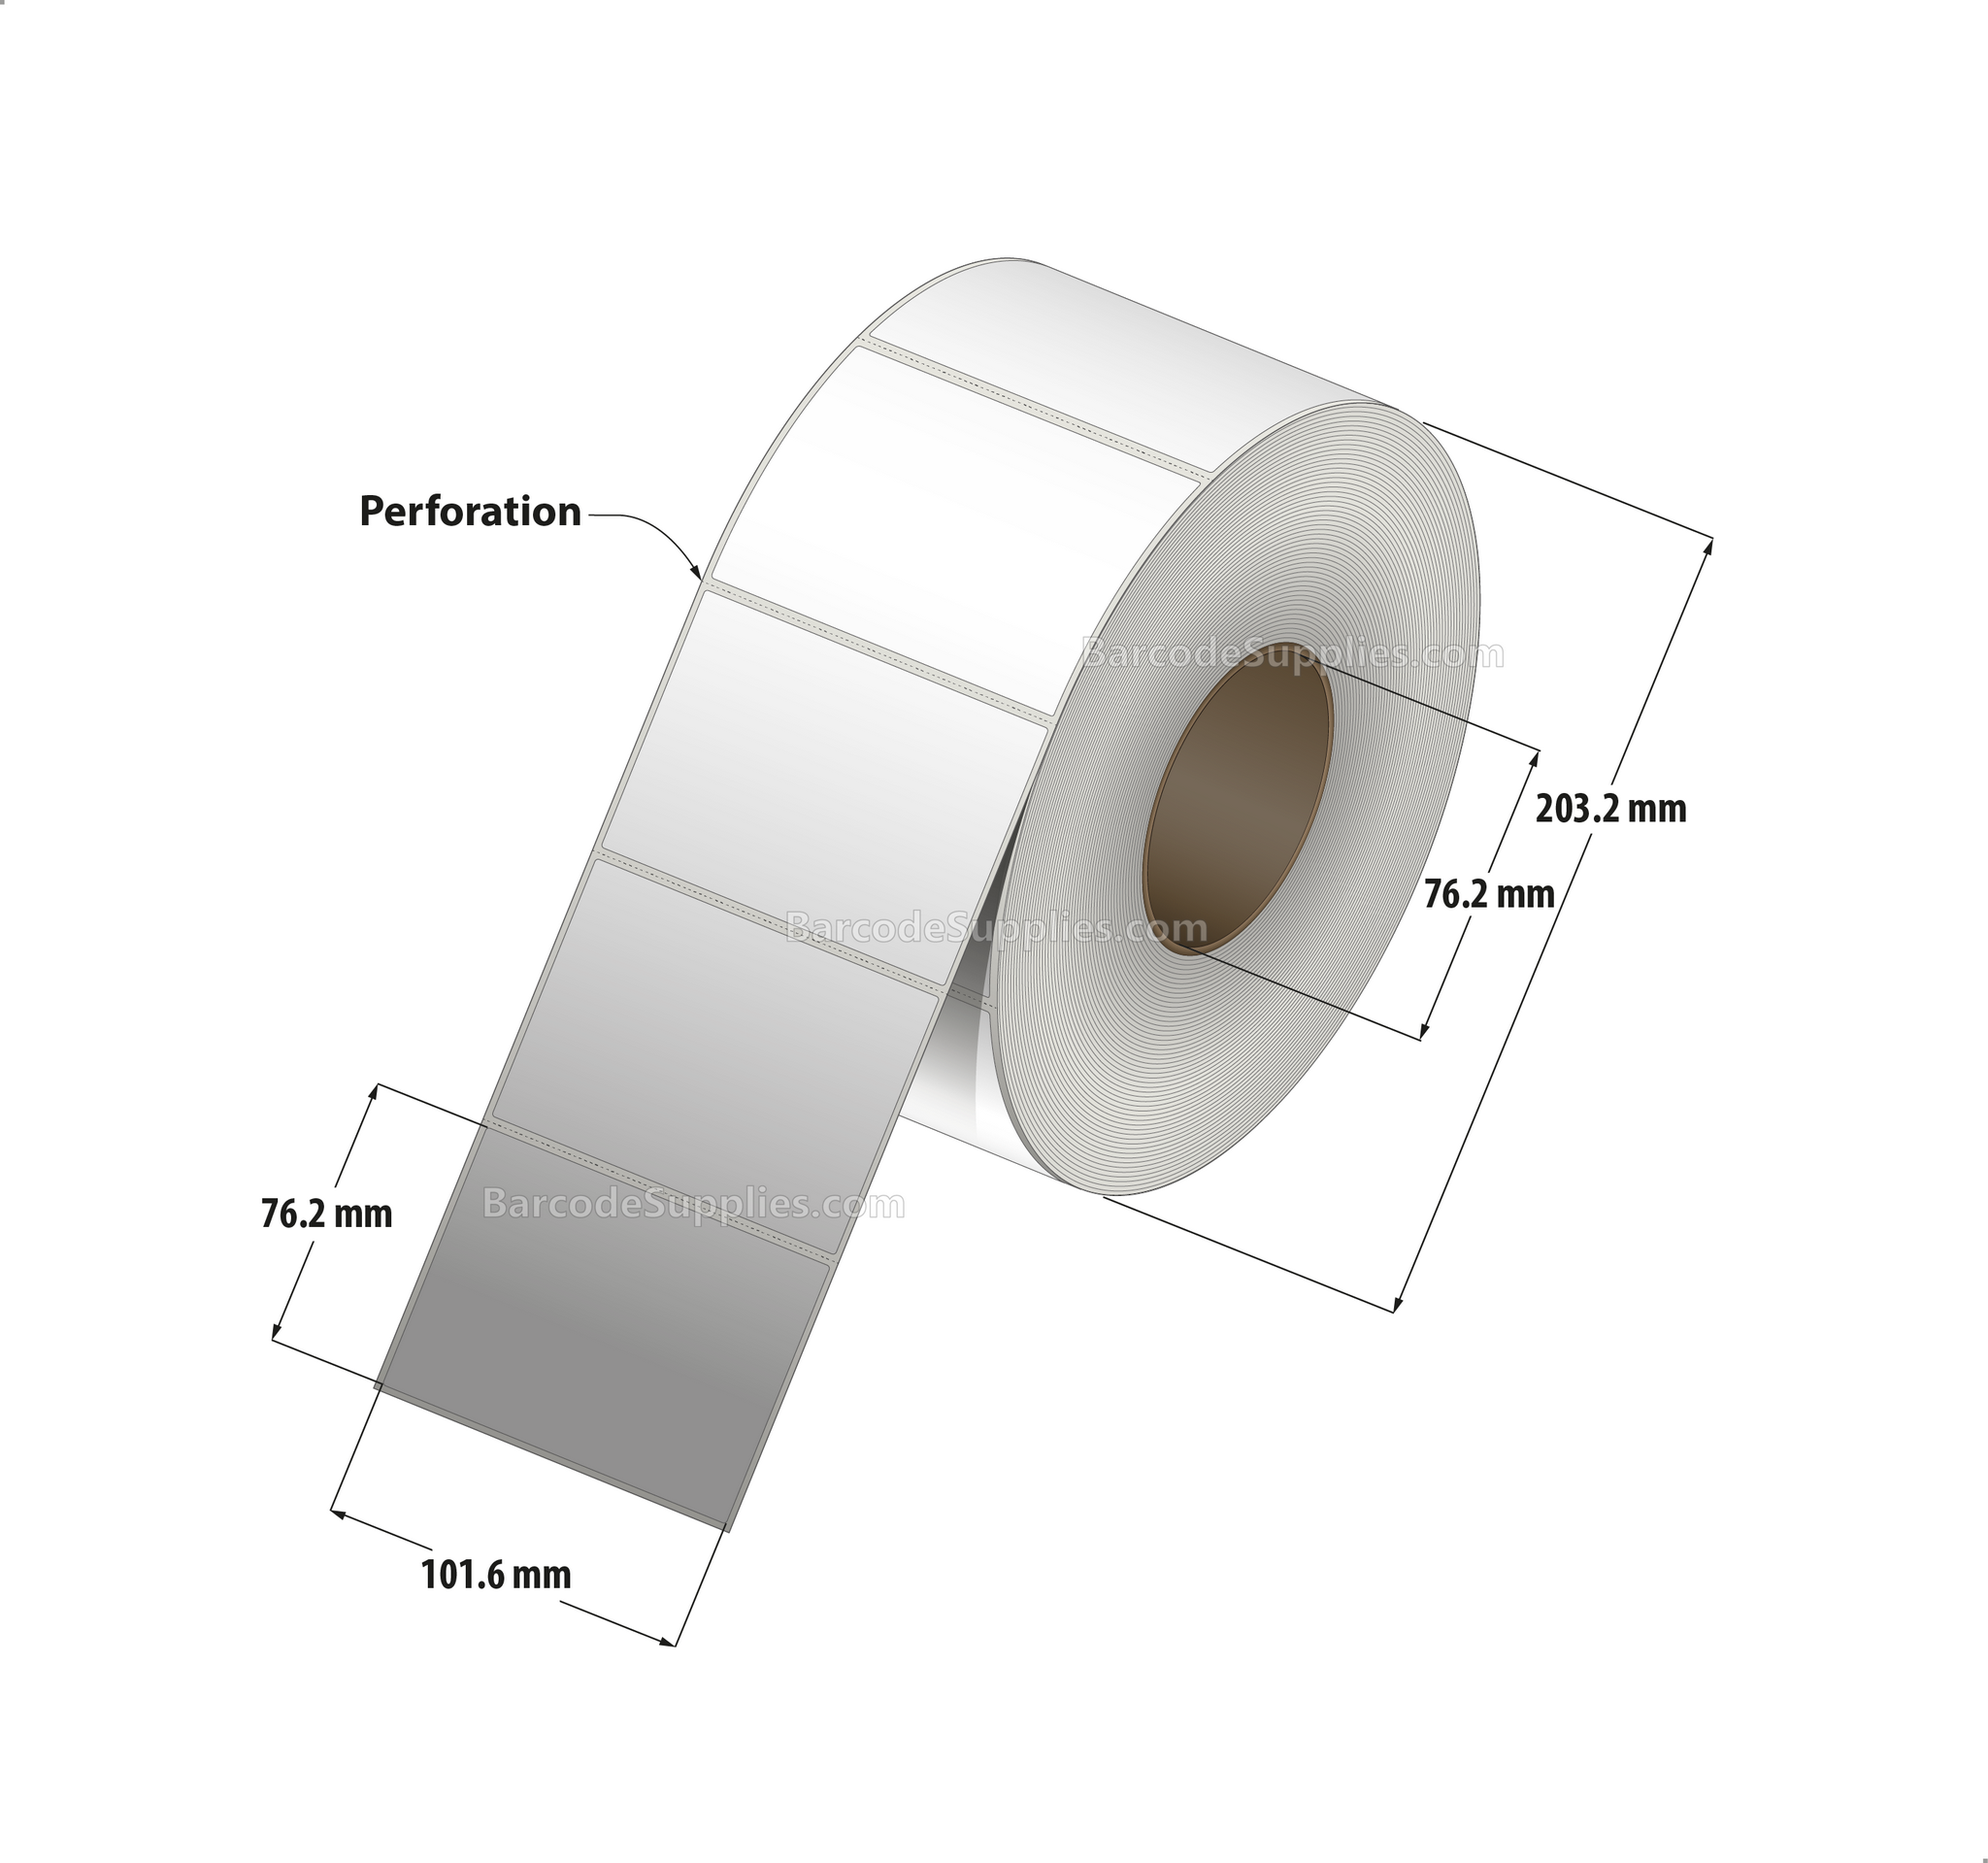 4 x 3 Thermal Transfer White Labels With Permanent Acrylic Adhesive - Perforated - 1900 Labels Per Roll - Carton Of 4 Rolls - 7600 Labels Total - MPN: TH43-1P